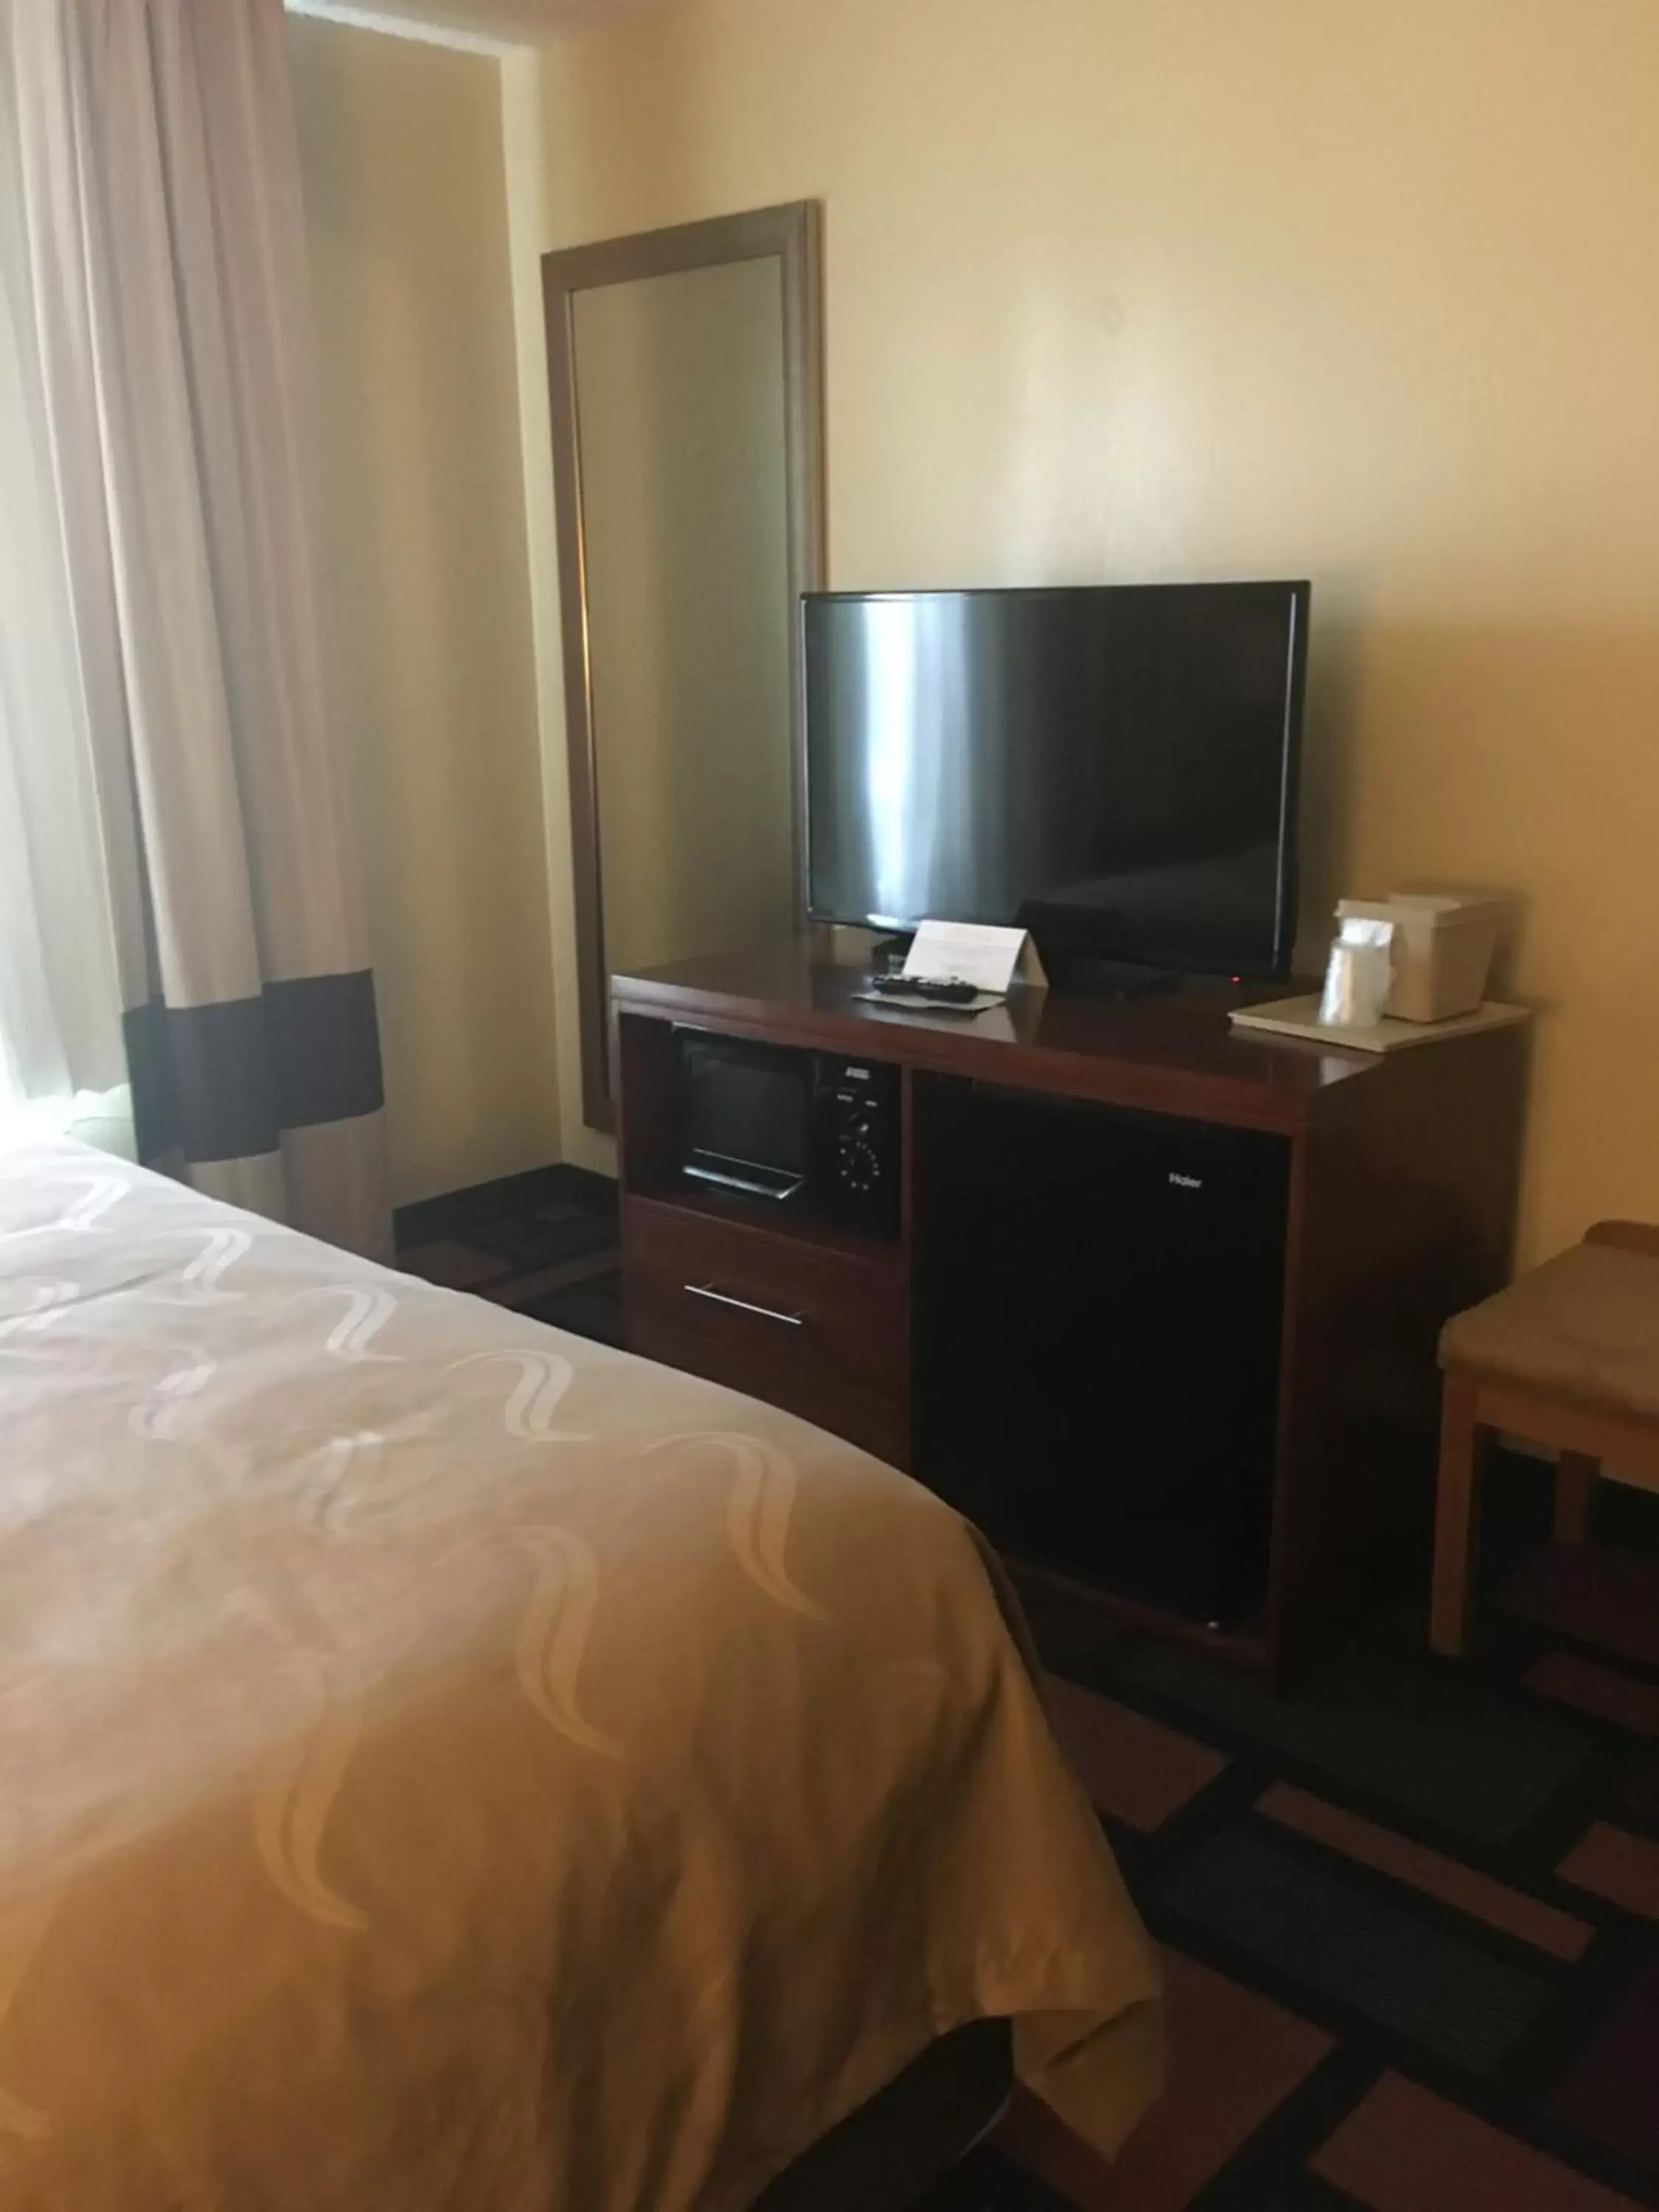 Queen Room with Two Queen Beds - Non-Smoking in Quality Inn & Suites